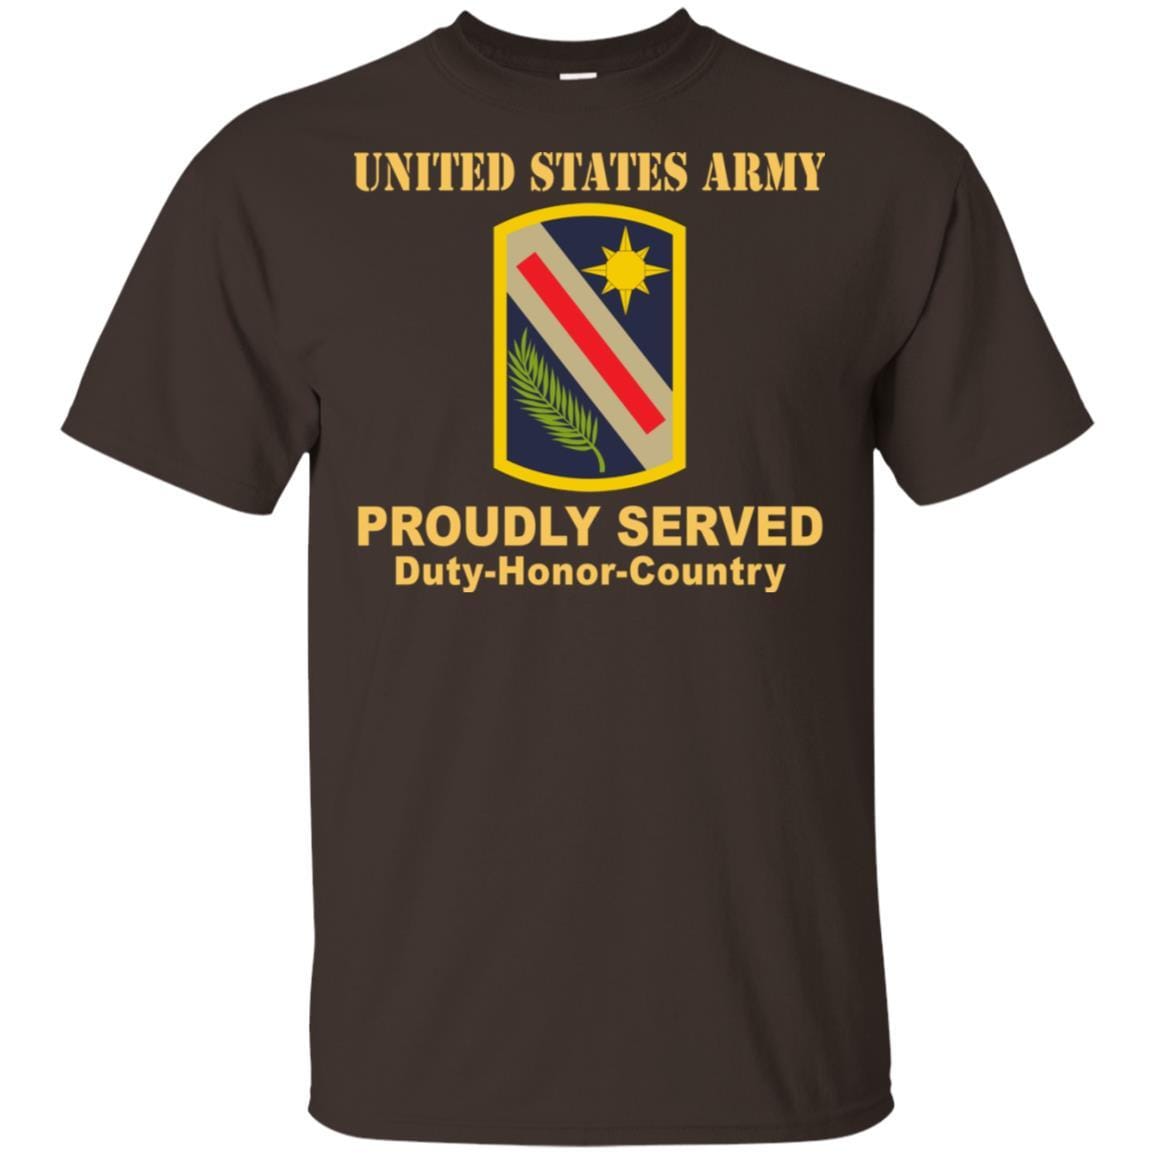 US ARMY 321 SUSTAINMENT BRIGADE- Proudly Served T-Shirt On Front For Men-TShirt-Army-Veterans Nation